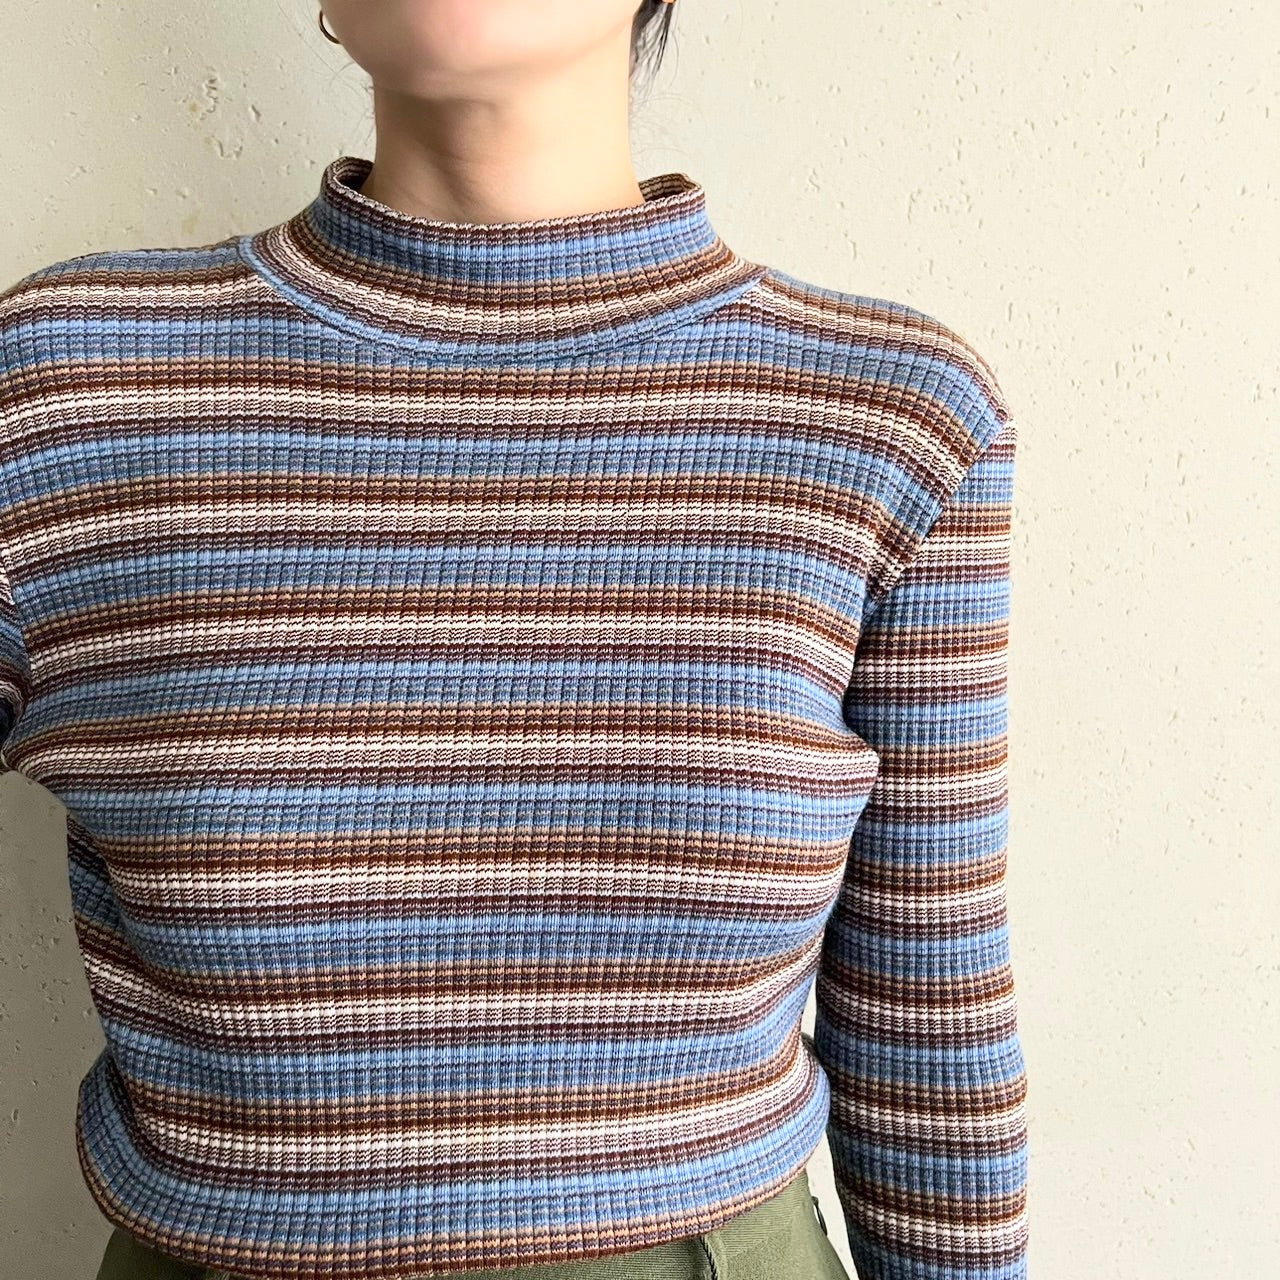 90s Blue Striped Top Made in USA